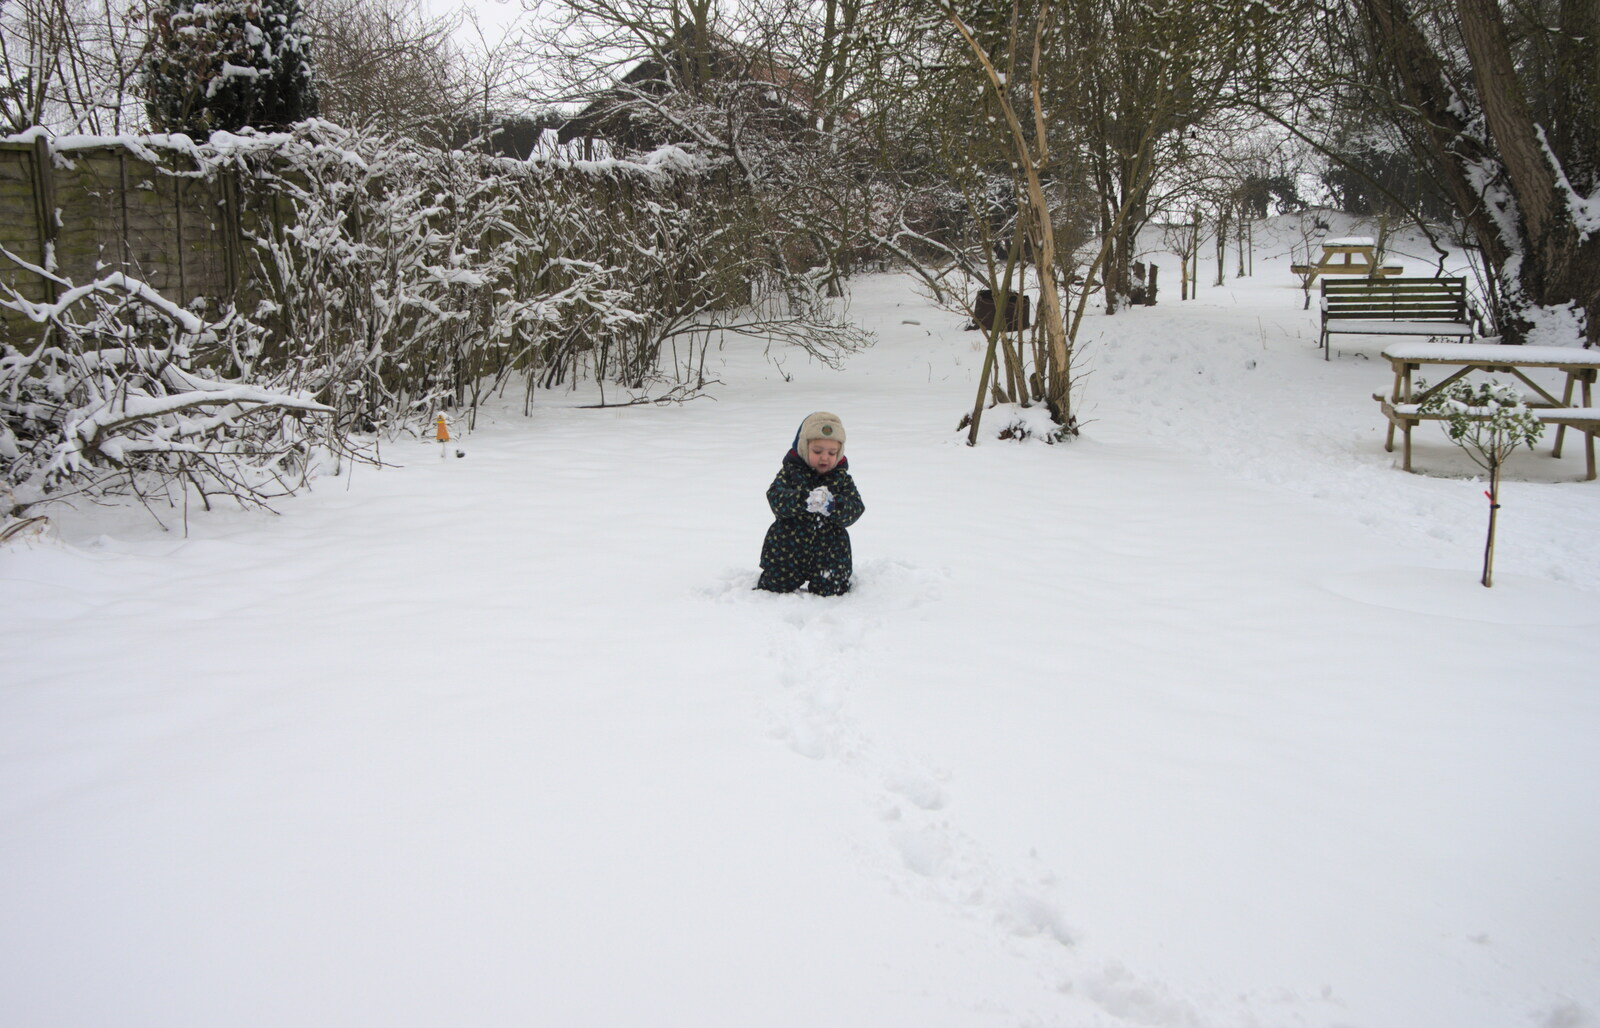 Fred trundles around and makes a snowball from A Snowy February Miscellany, Suffolk - 7th February 2012